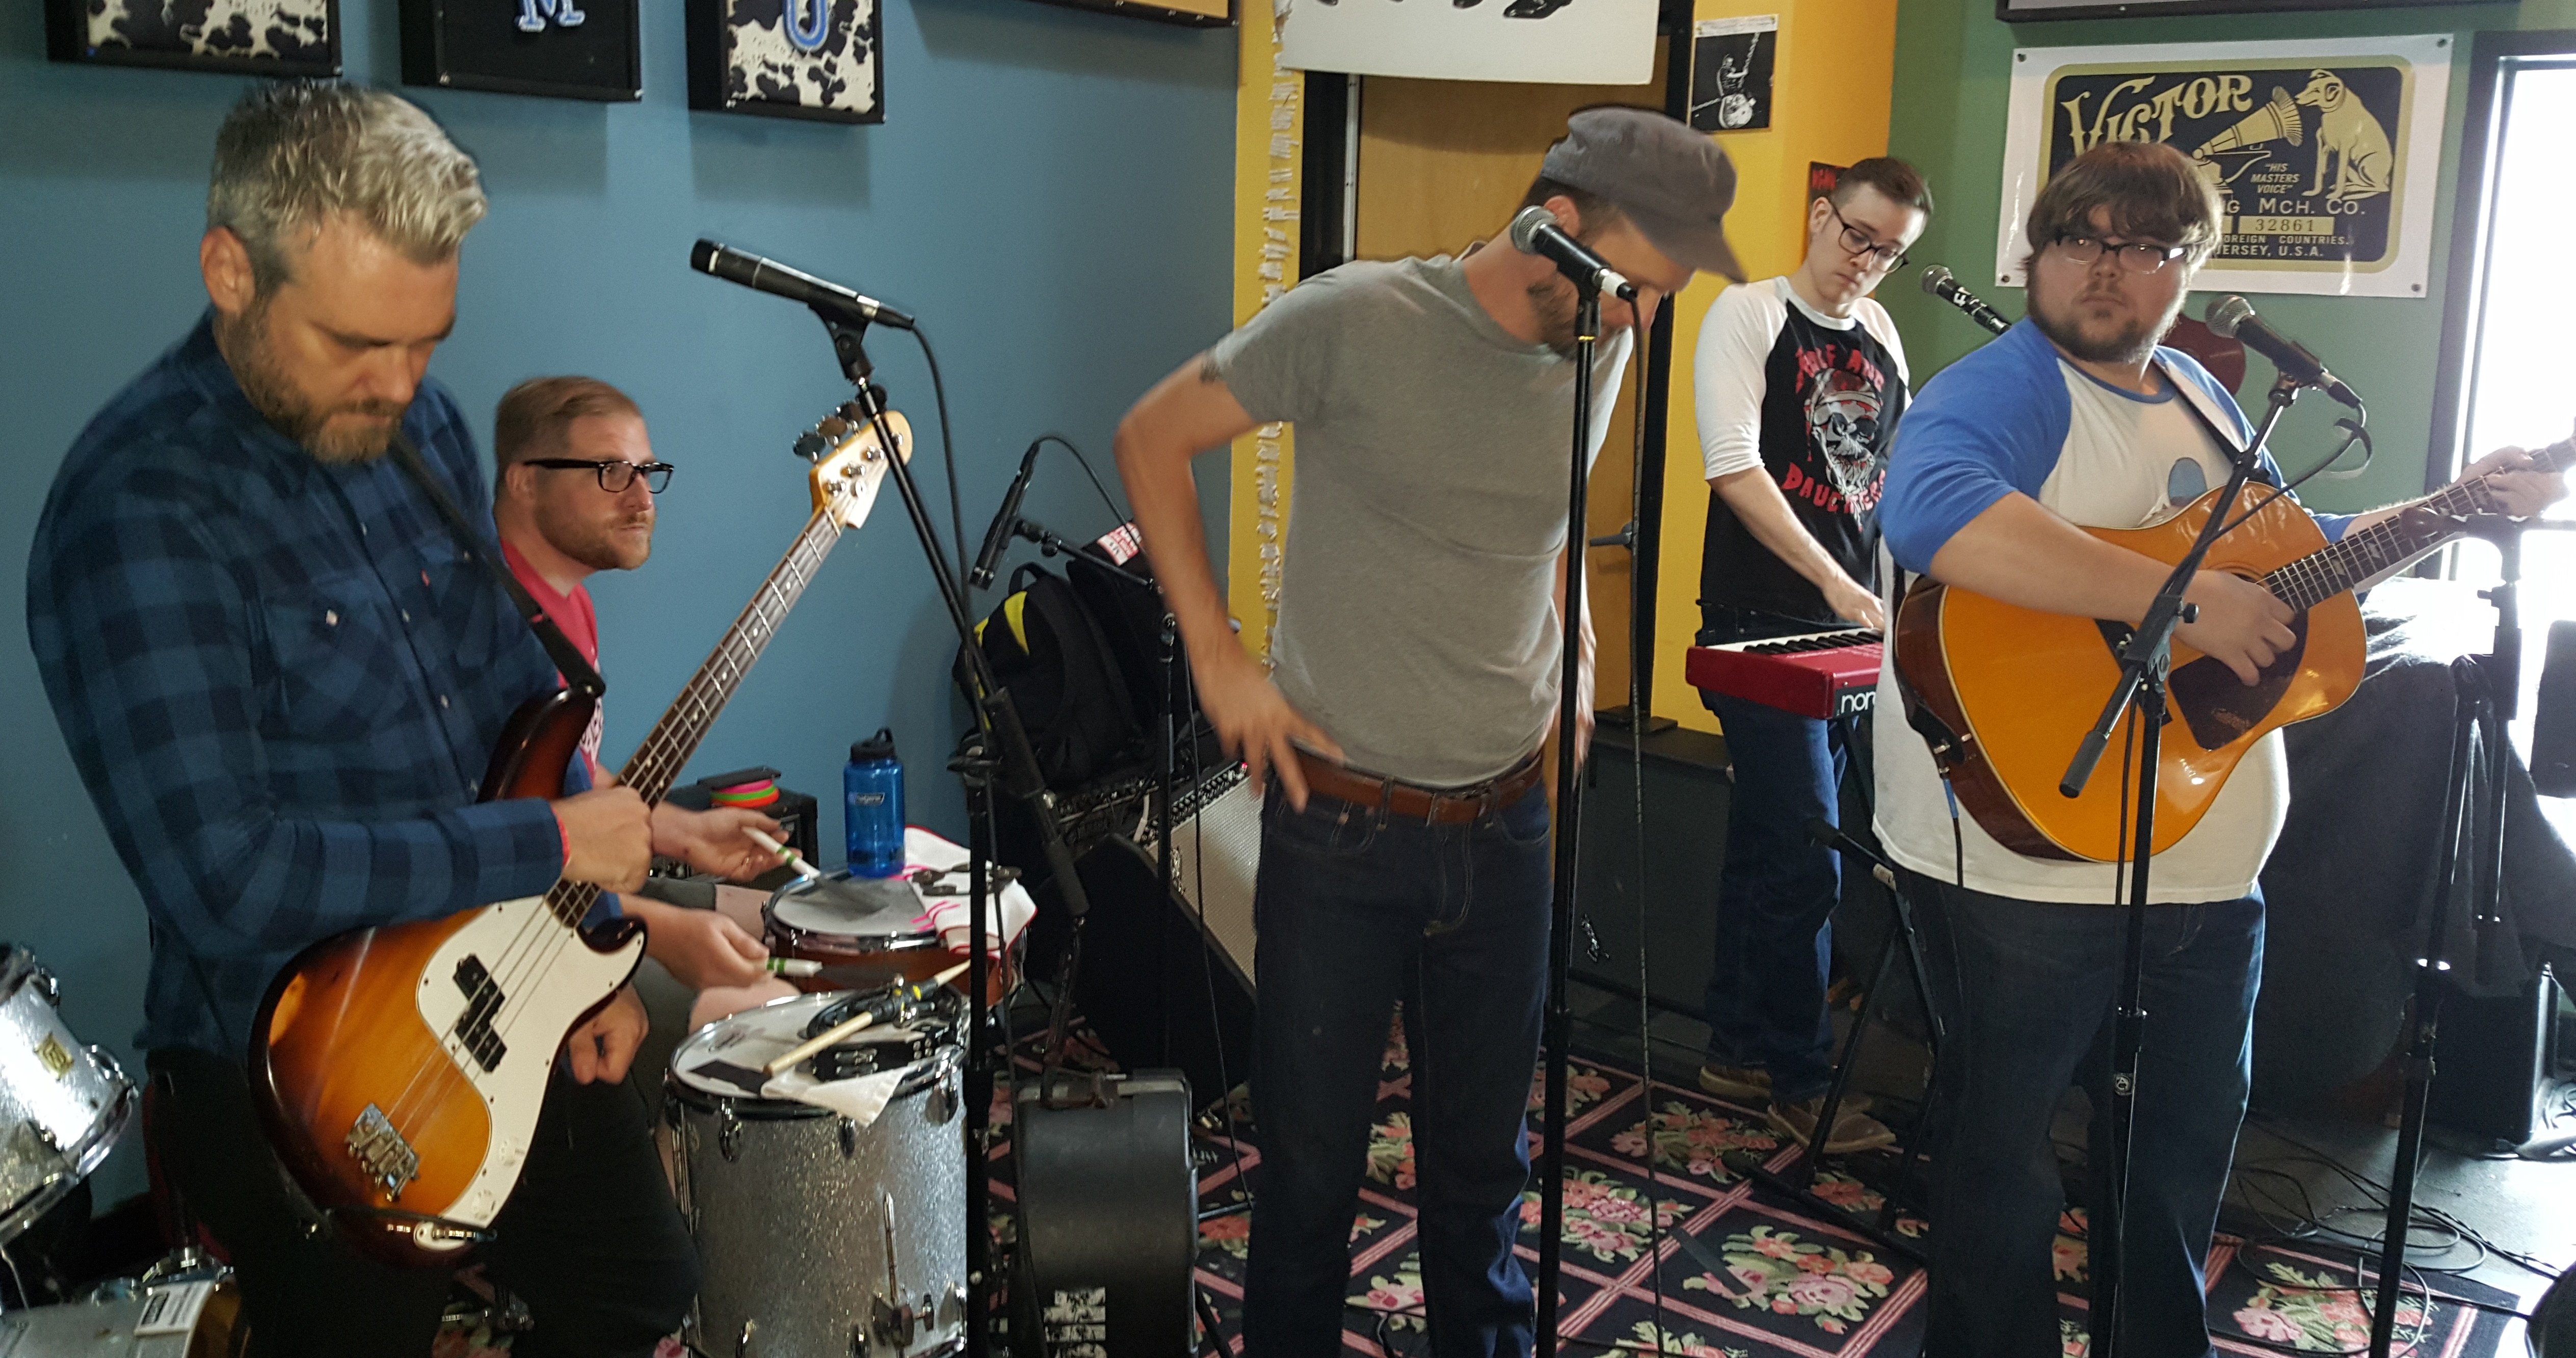 The_Explorers_Club_at_WFMU_Michael_Shelley_show_July_2_2016